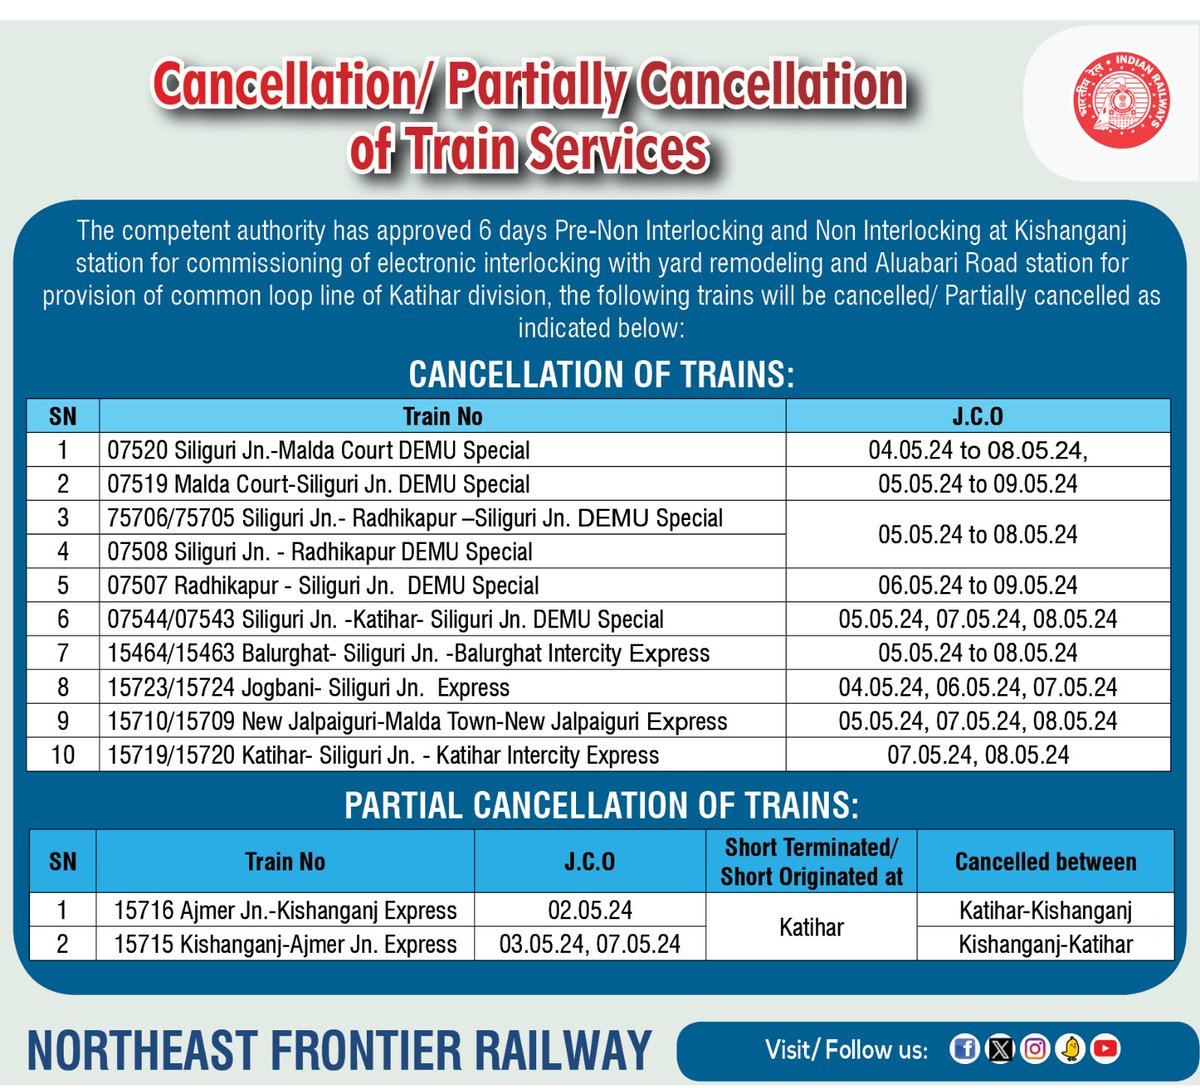 Regulation of train services for undertaking capacity augmentation works.